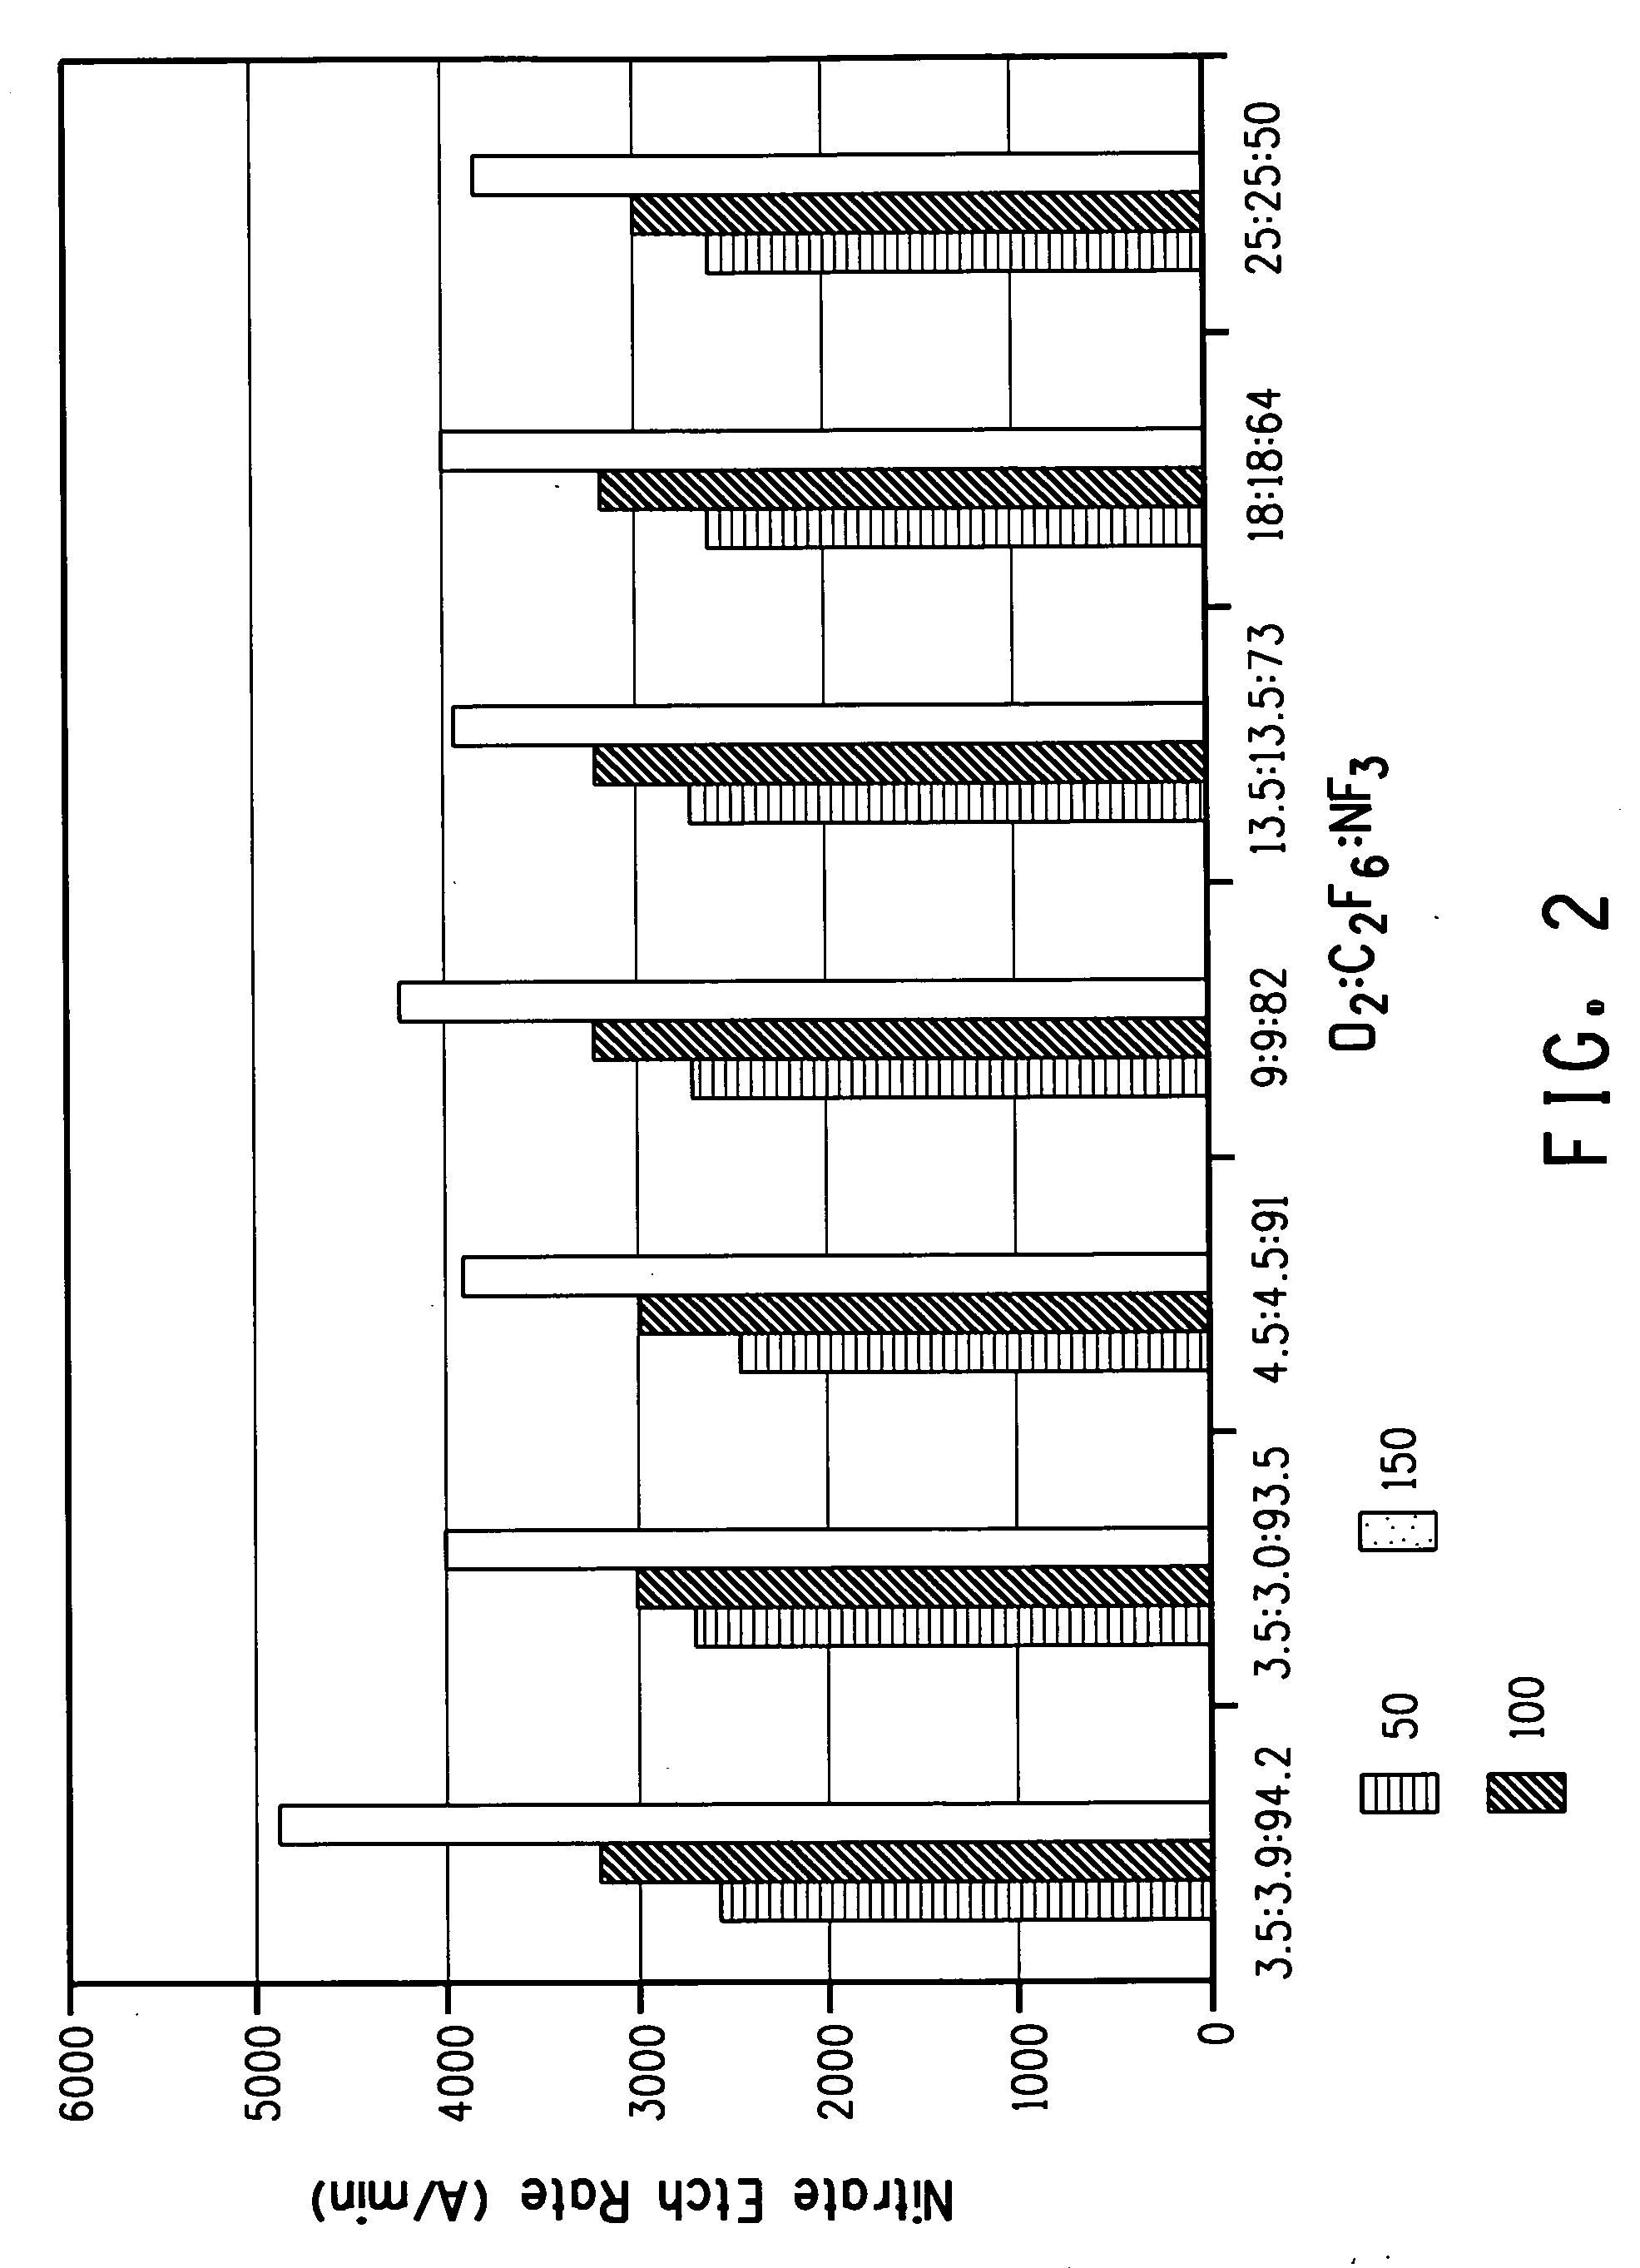 Method of using NF3 for removing surface deposits from the interior of chemical vapor deposition chambers